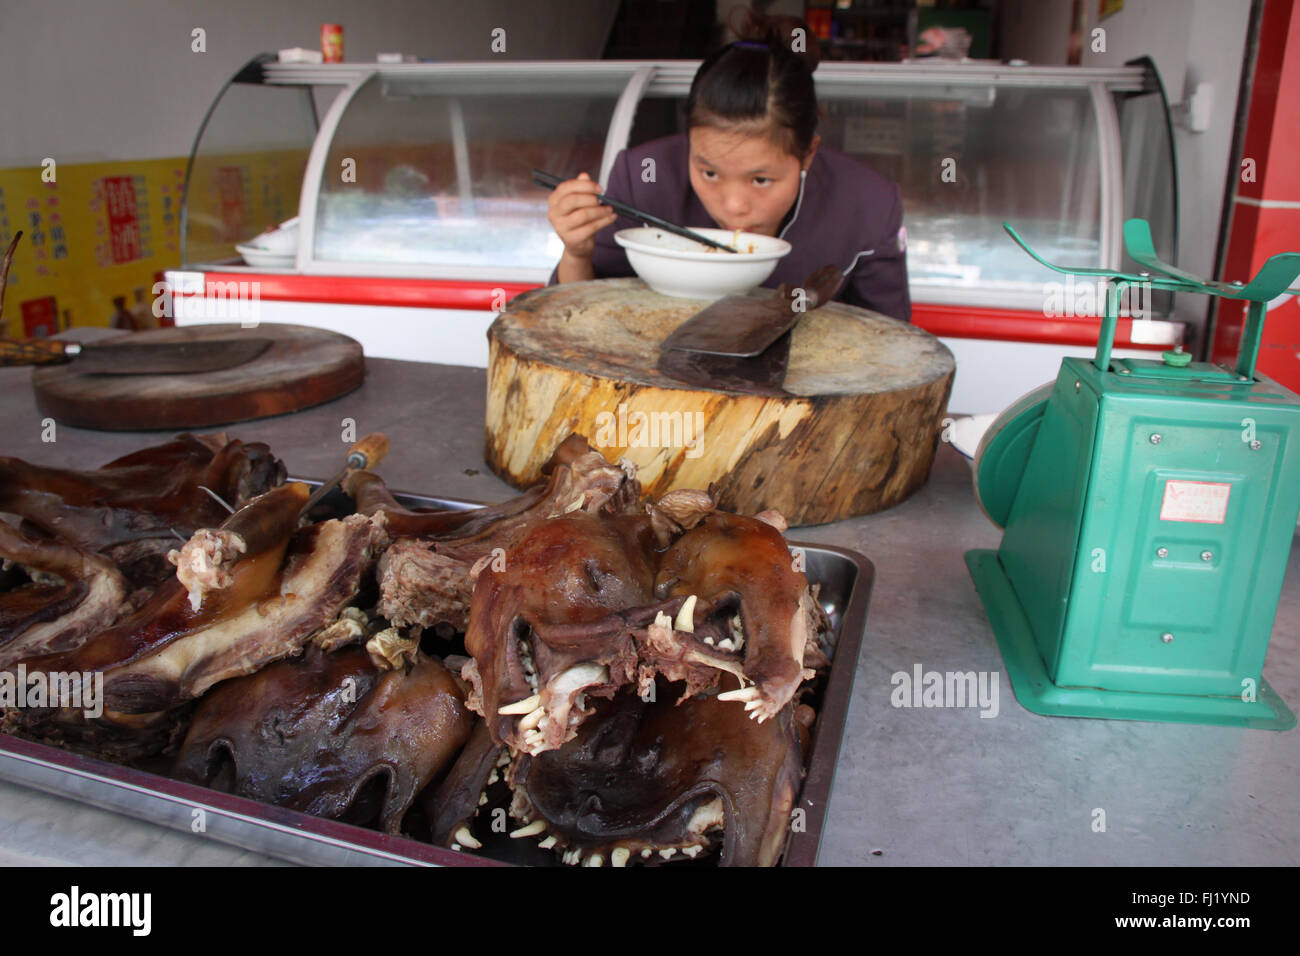 Woman eating dog meat in Guiyang, China Stock Photo - Alamy